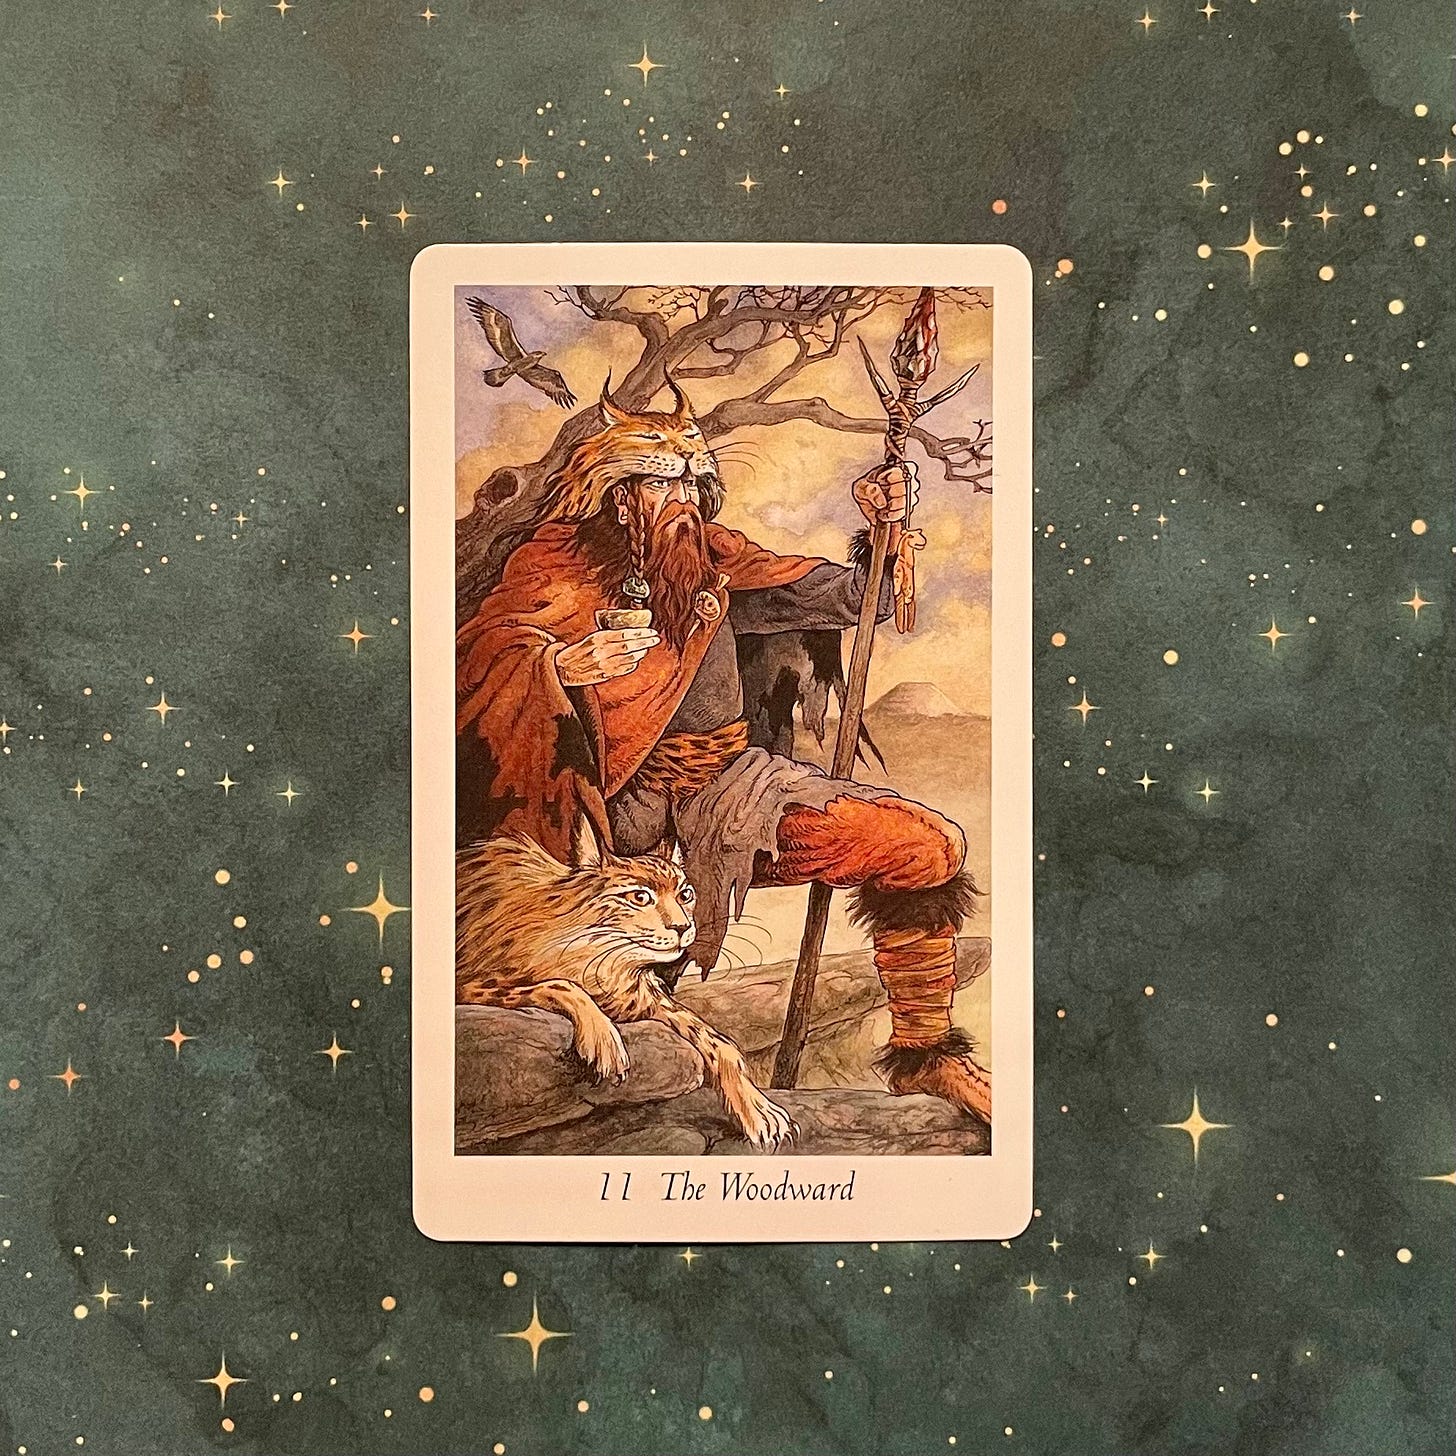 Photo of The Woodward tarot card on a green star covered background. The Woodward is a man dressed in skins and furs holding a stand with a wild cat next to him. A bird of prey flies overhead.